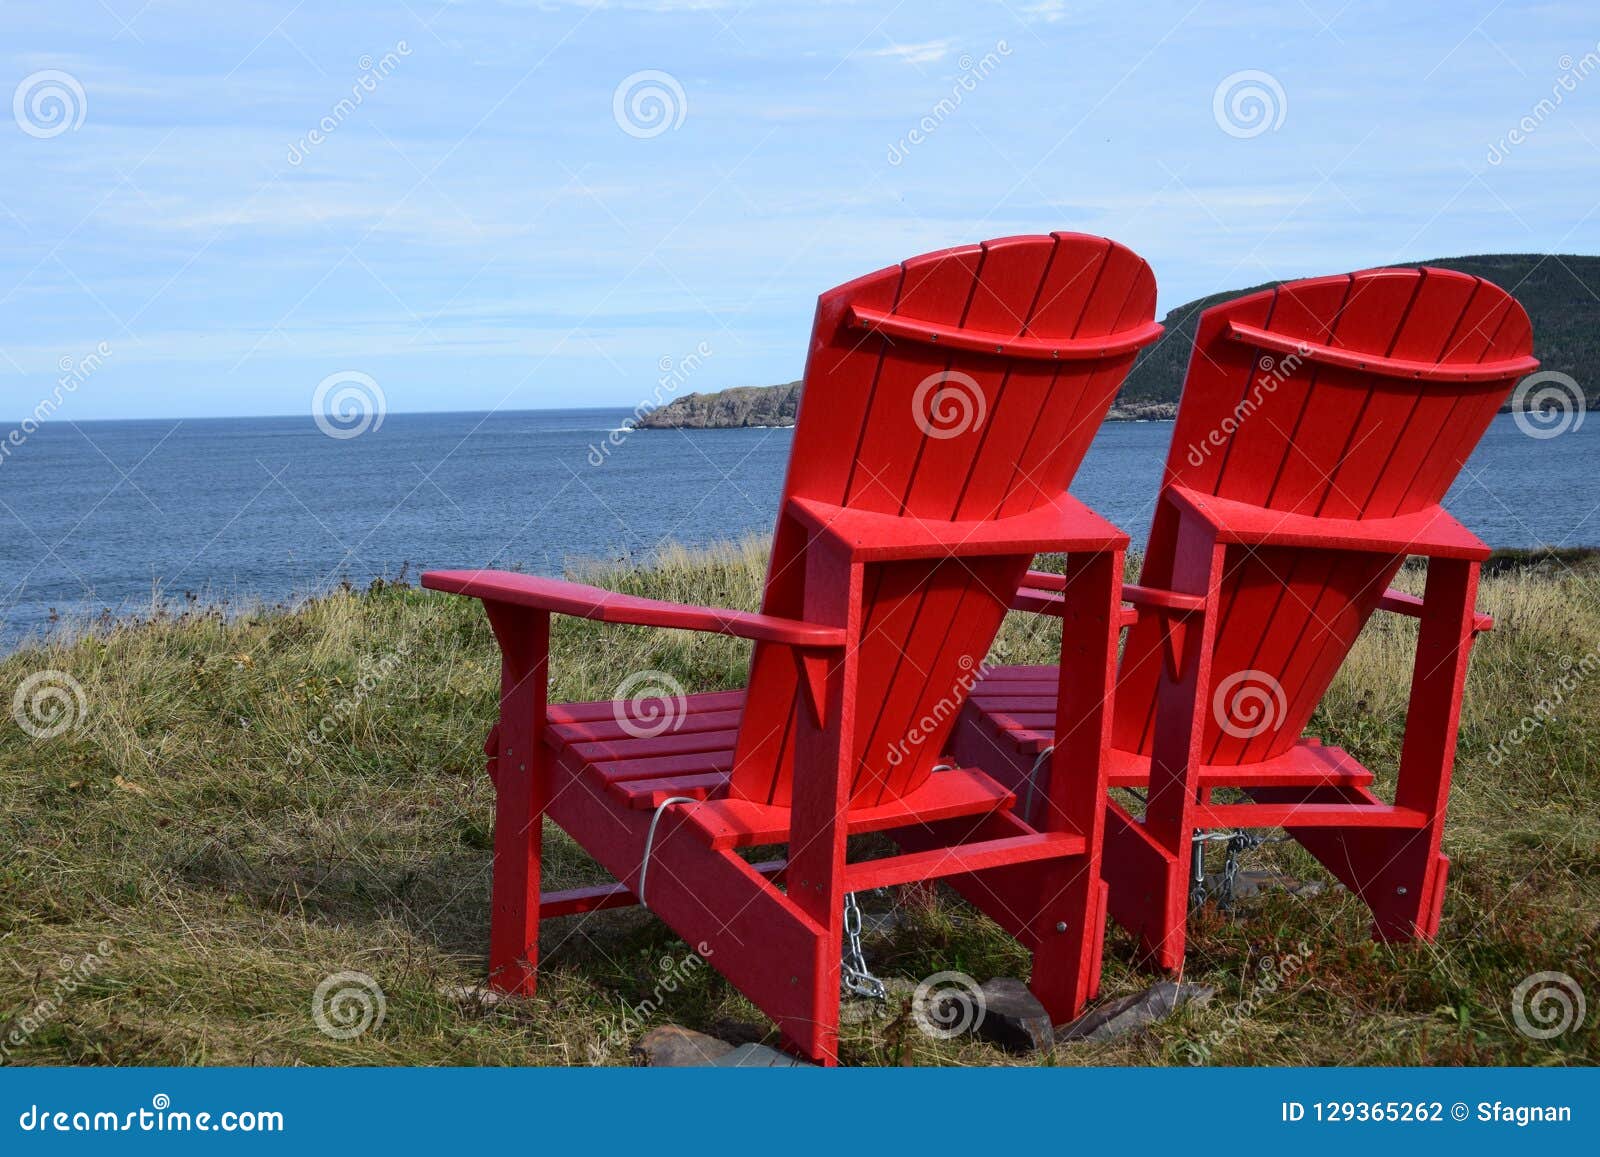 Red Adirondack Chairs On The Edge Of A Cliff Overlooking The Ocean